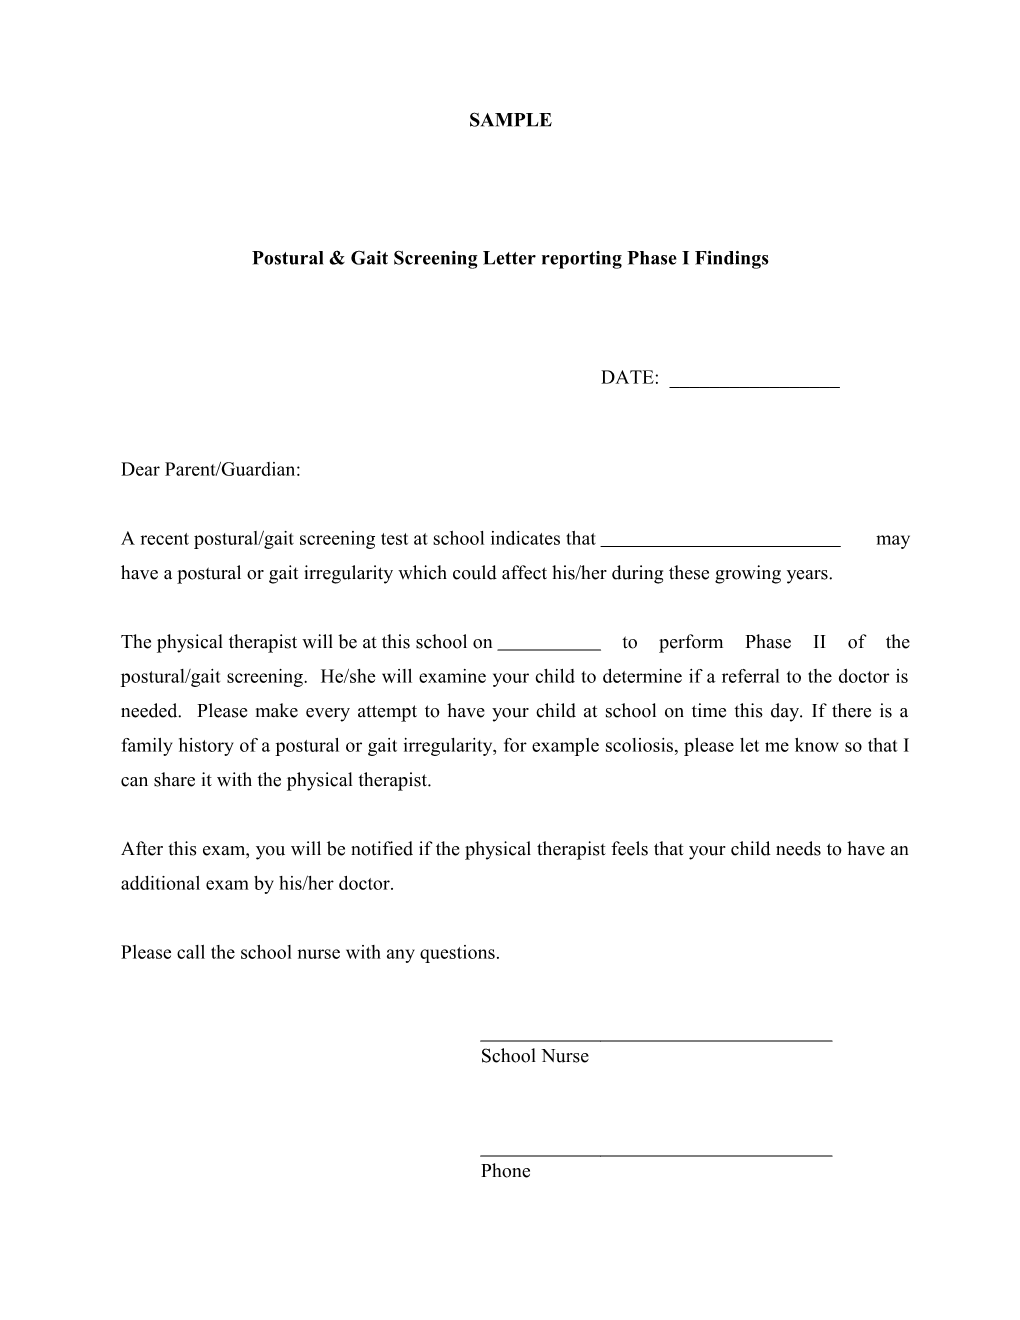 Postural & Gait Screening Letter Reporting Phase I Findings